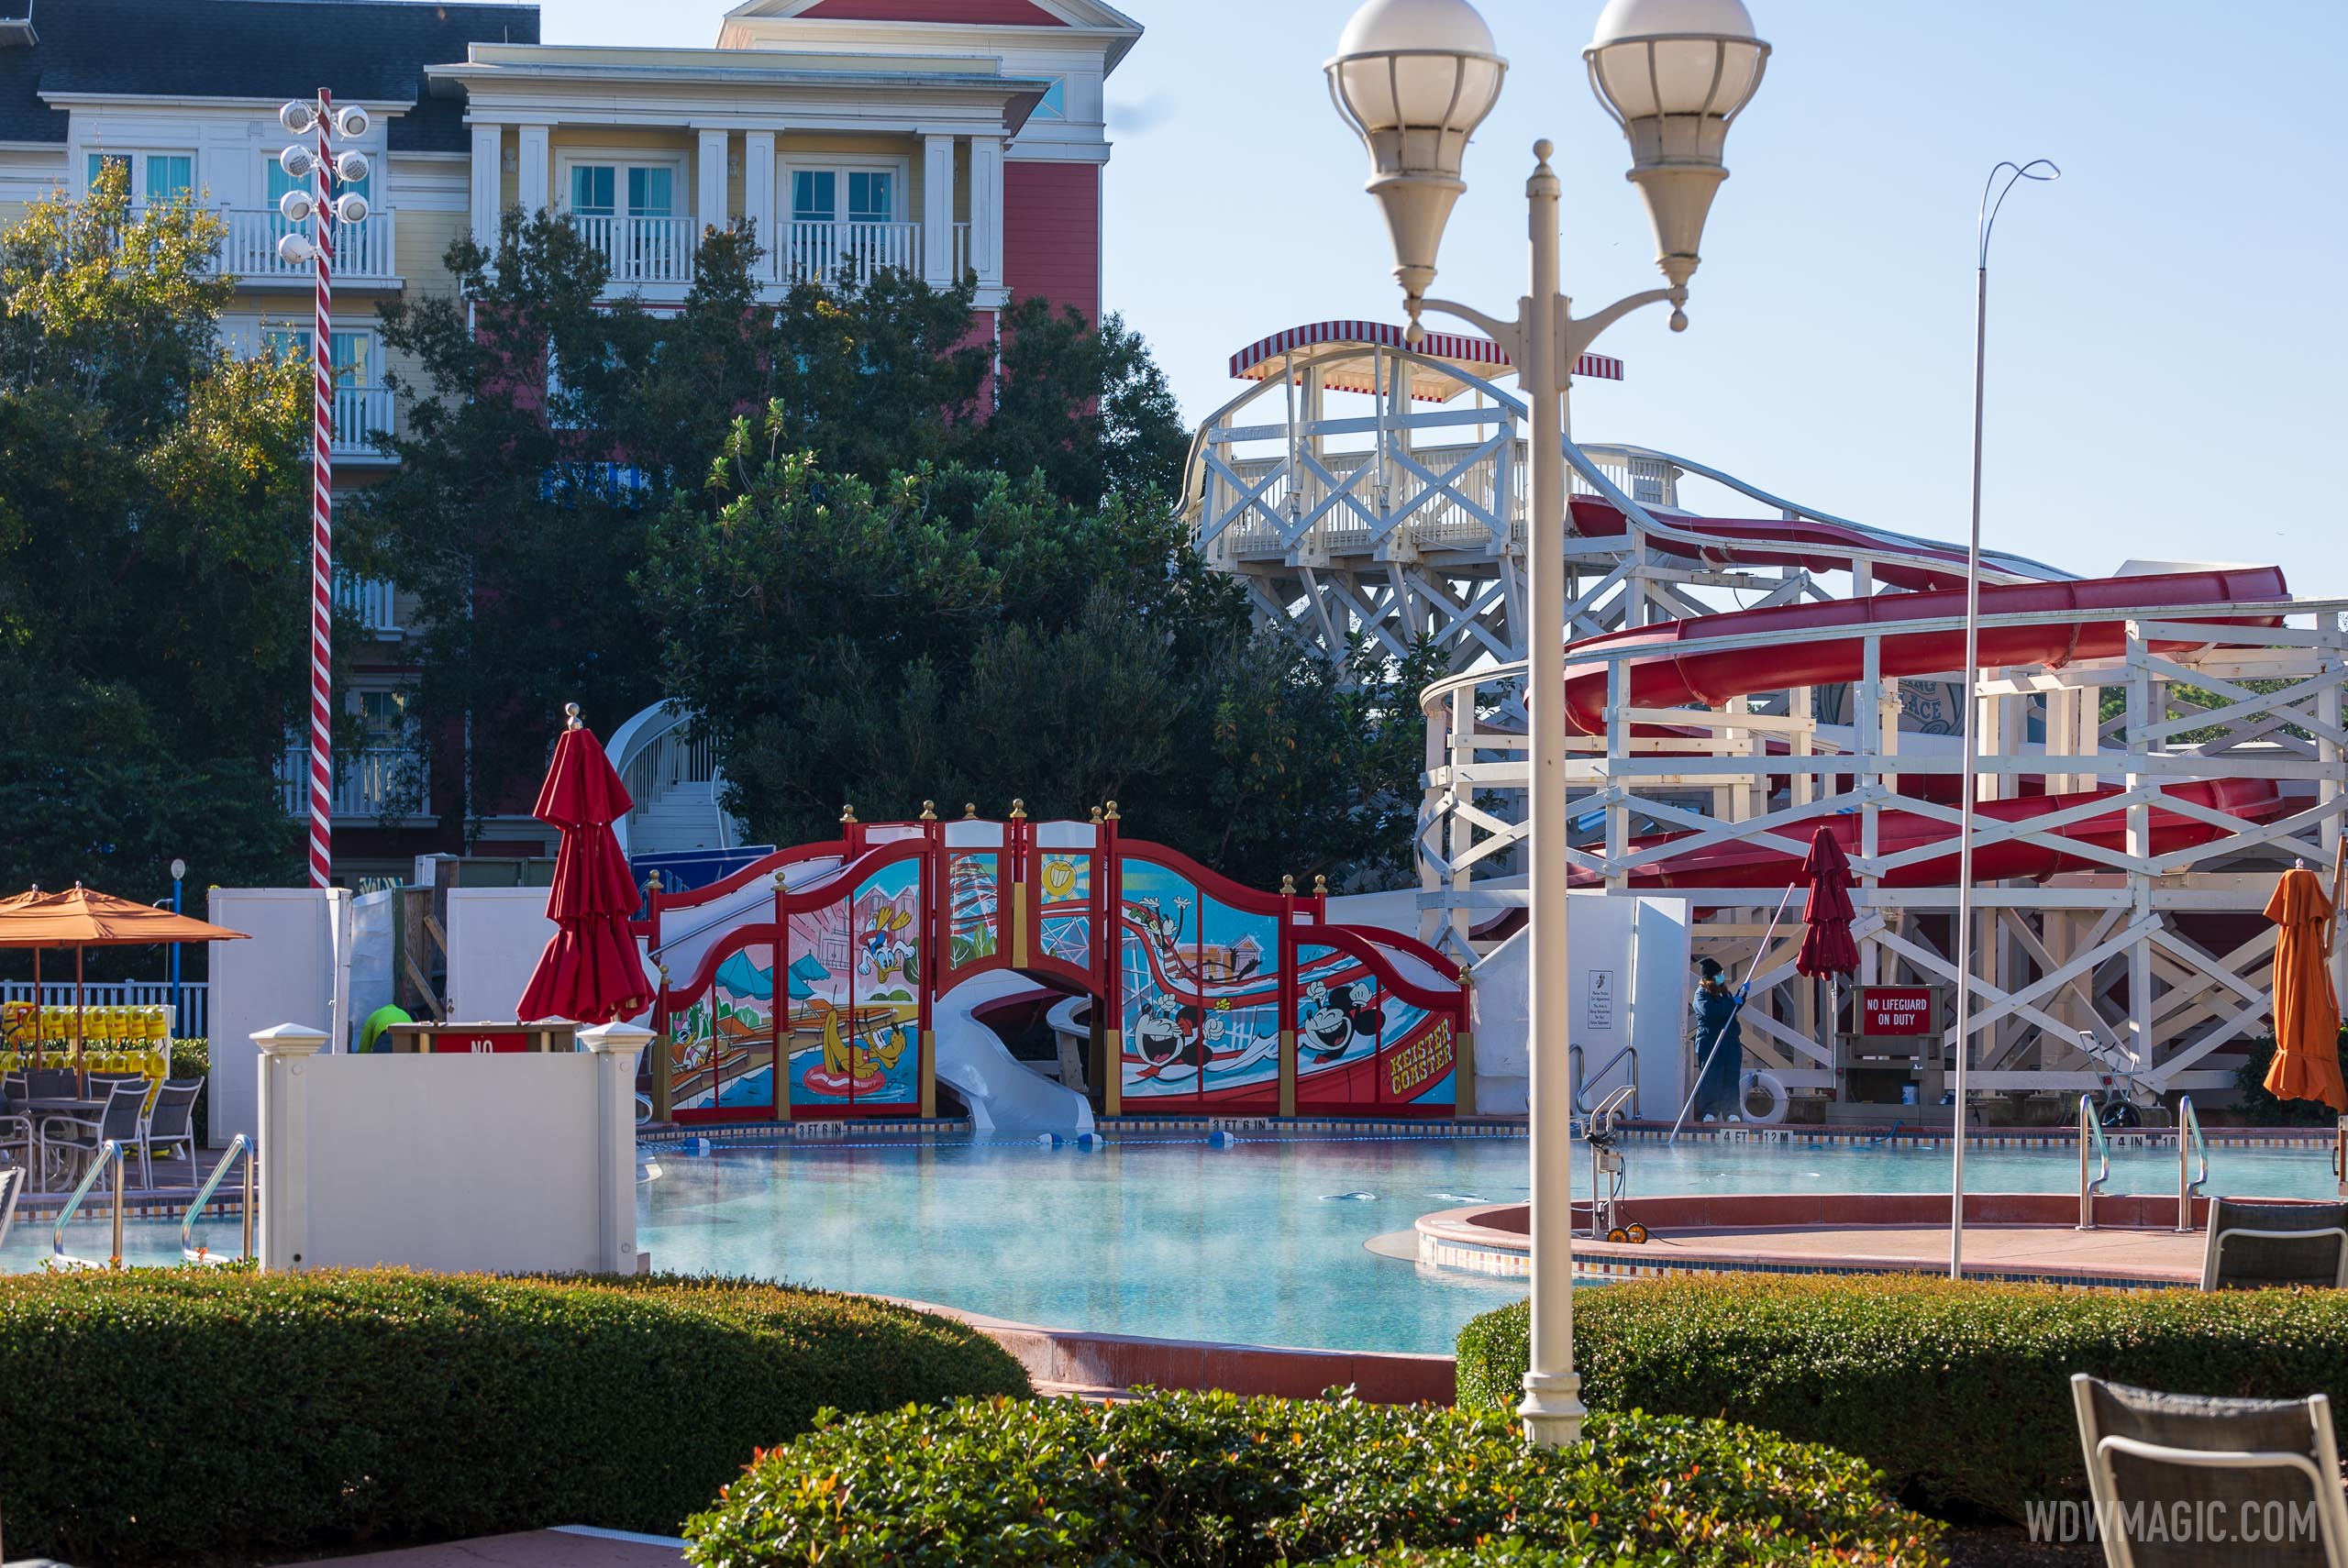 Walls down at the new-look slide at the Boardwalk’s Luna Park pool